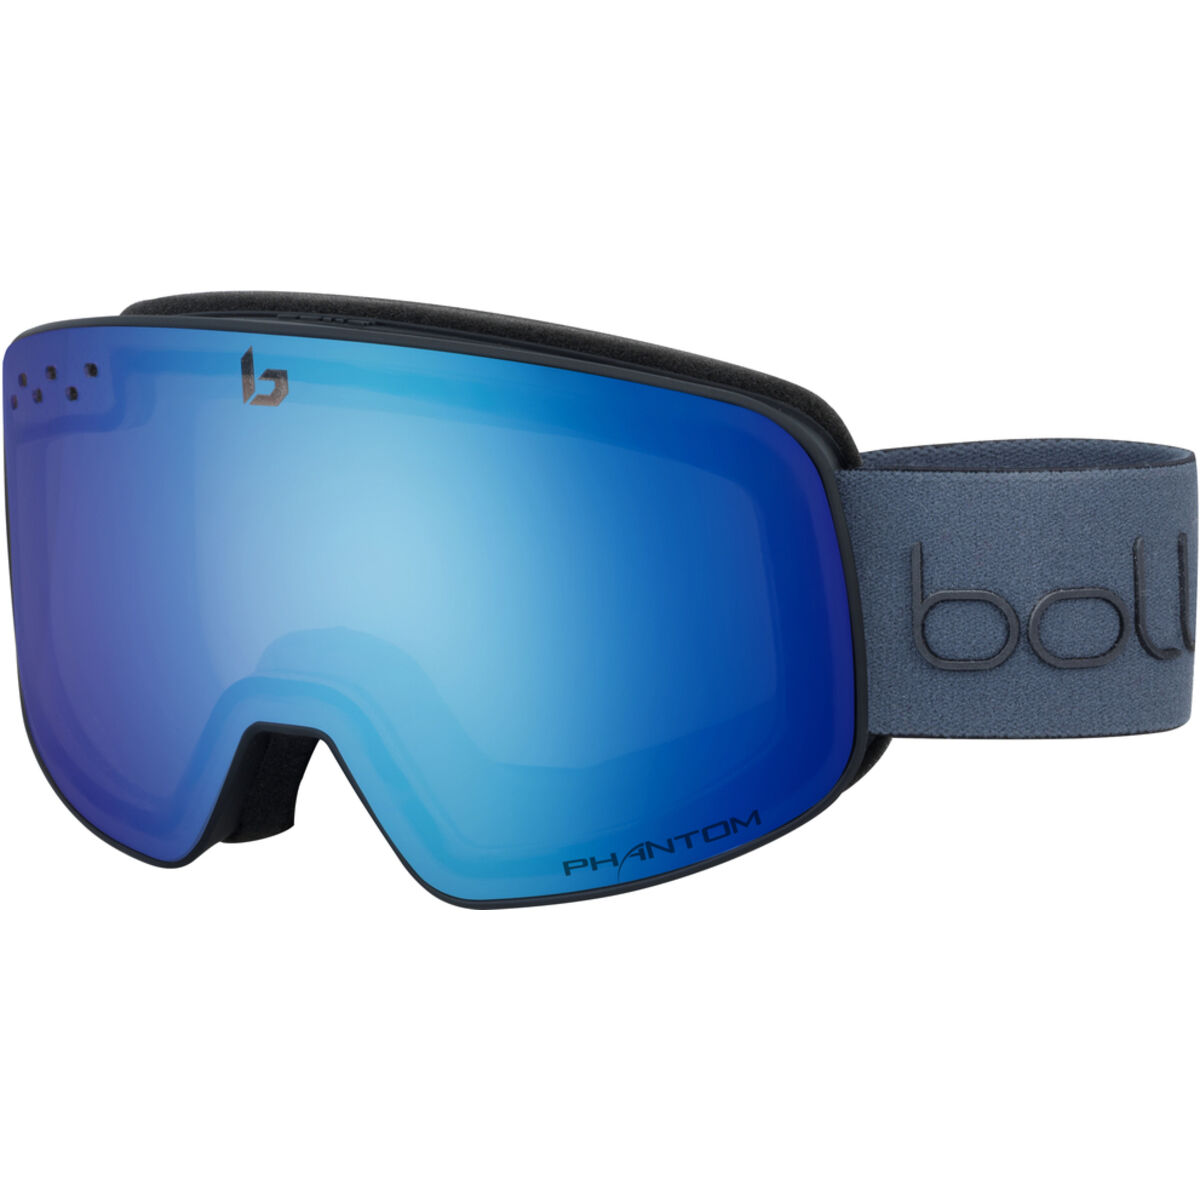 Bolle Bolle ski goggles Flow-tech ventilation and equalizer Yellow M-L 54917321789 